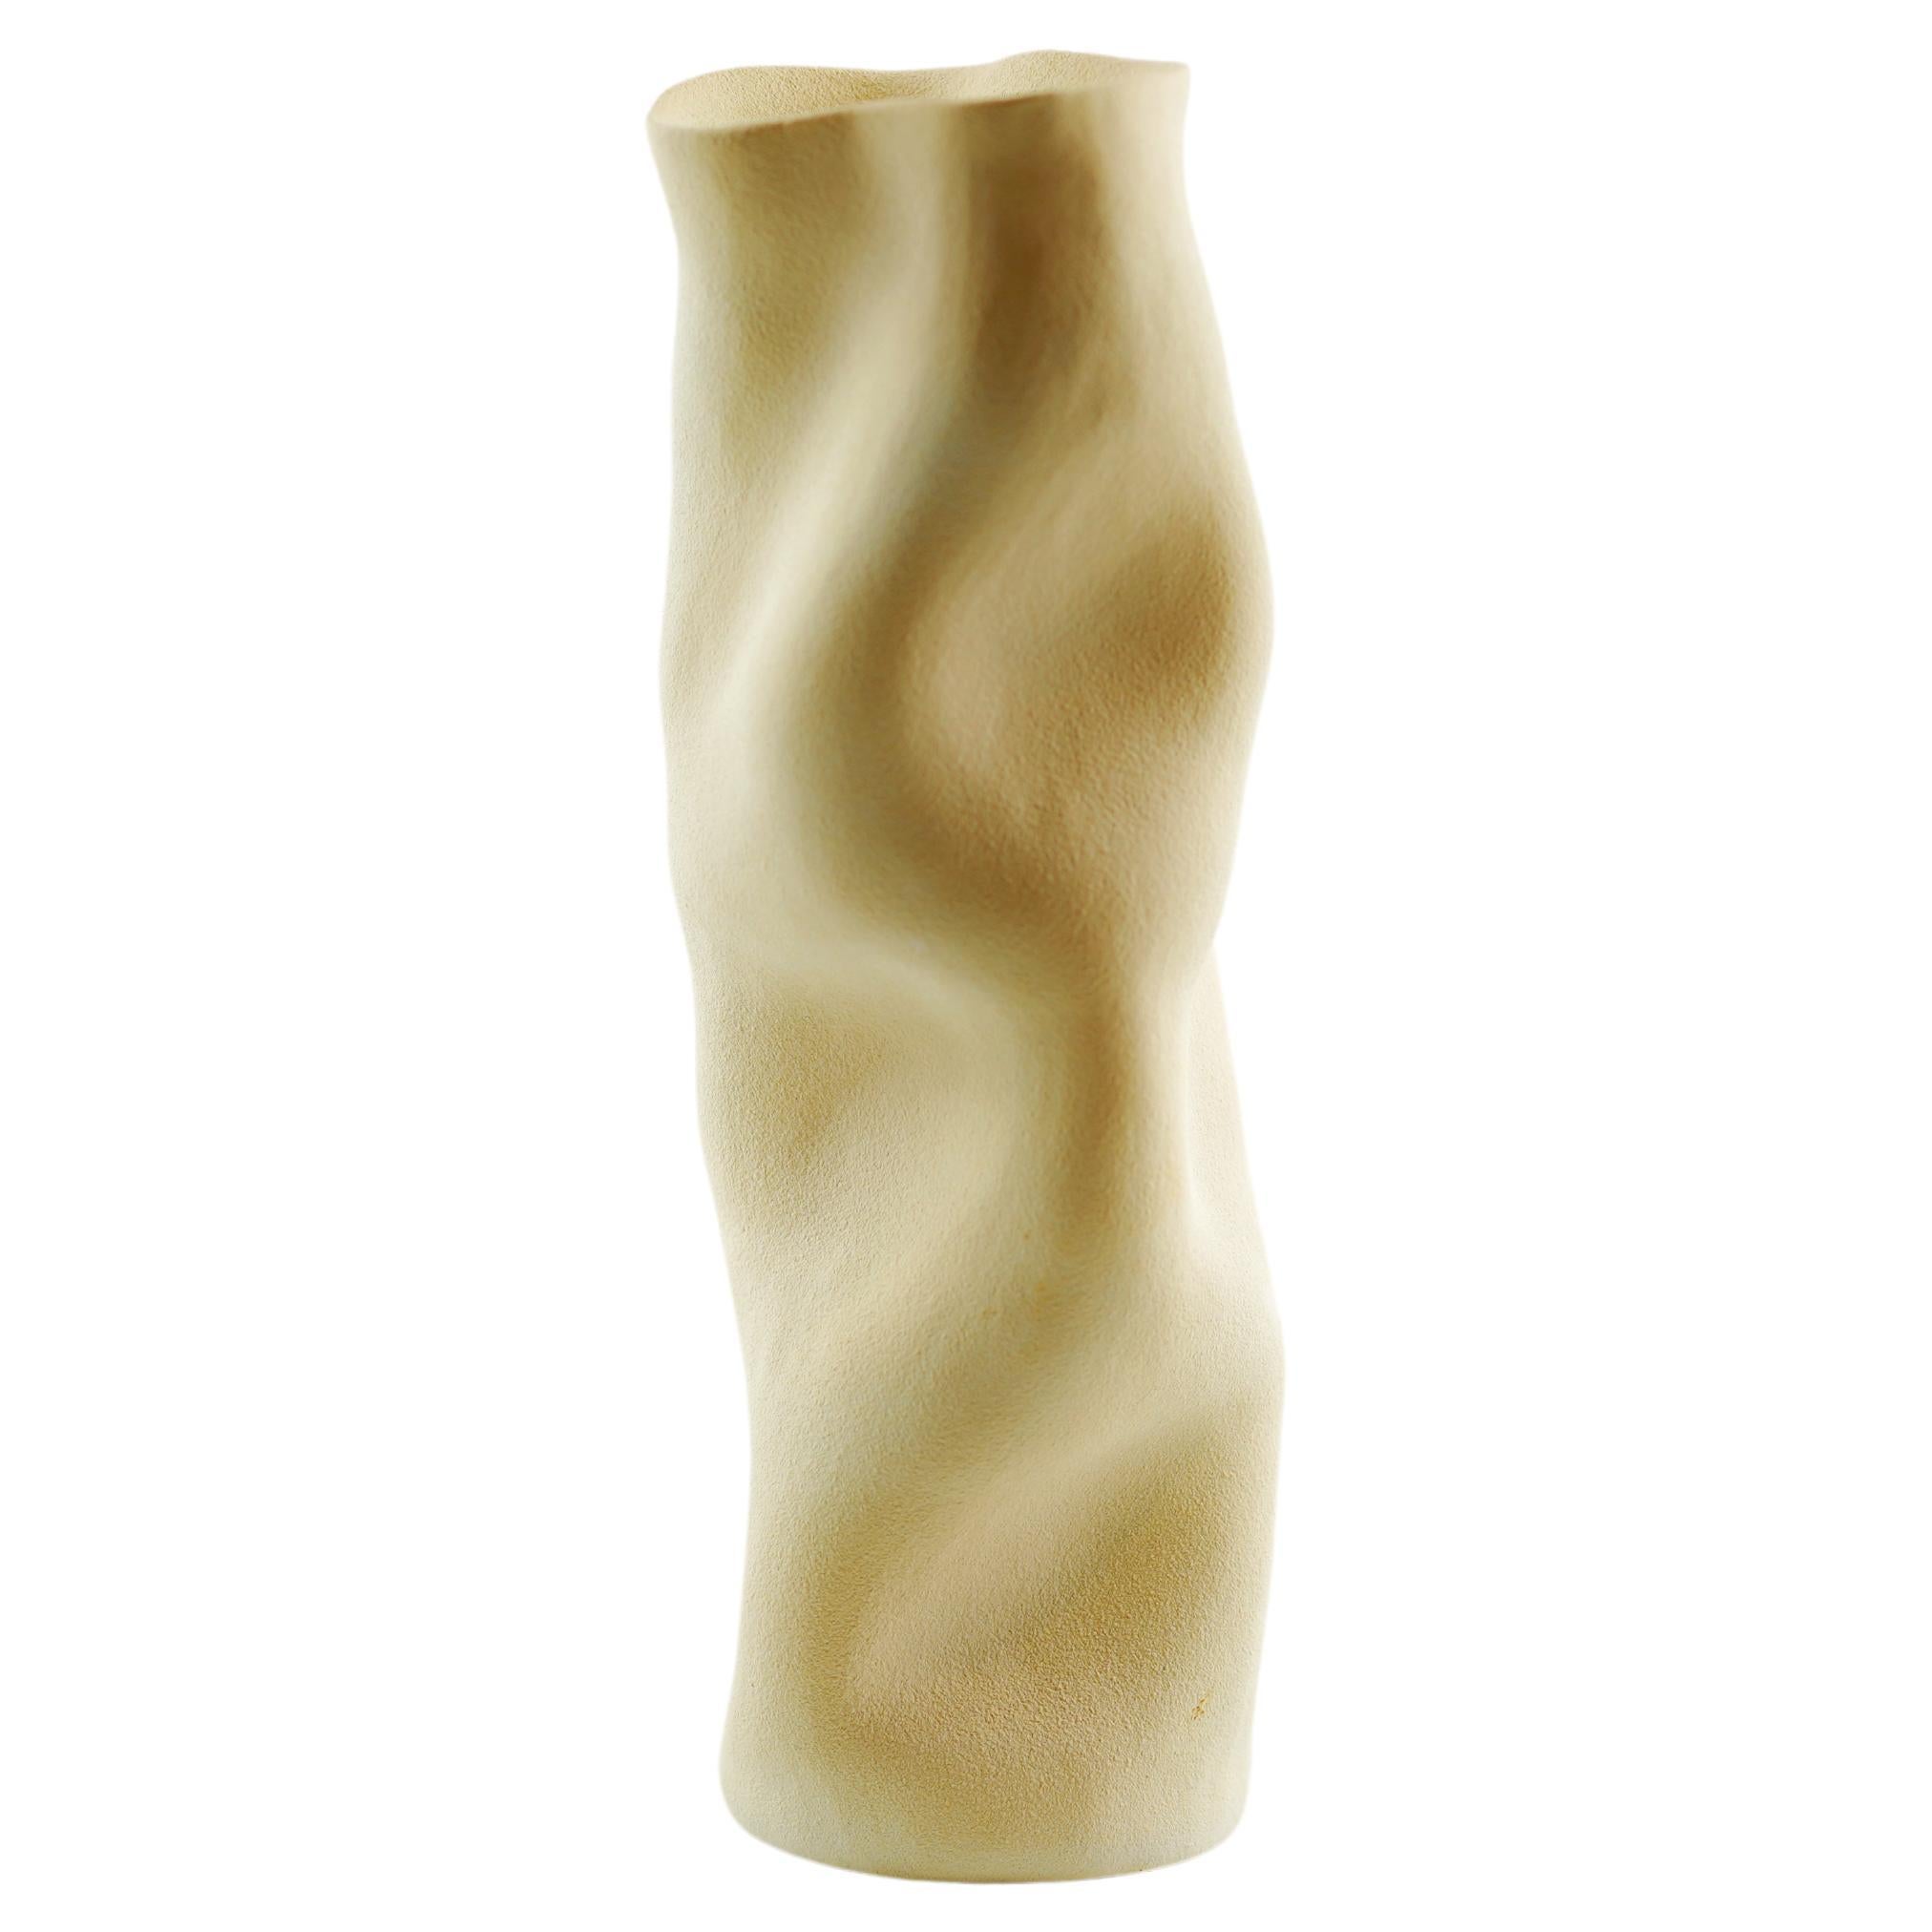 Earthly Body Organic Vase, Available in 4 Colours For Sale